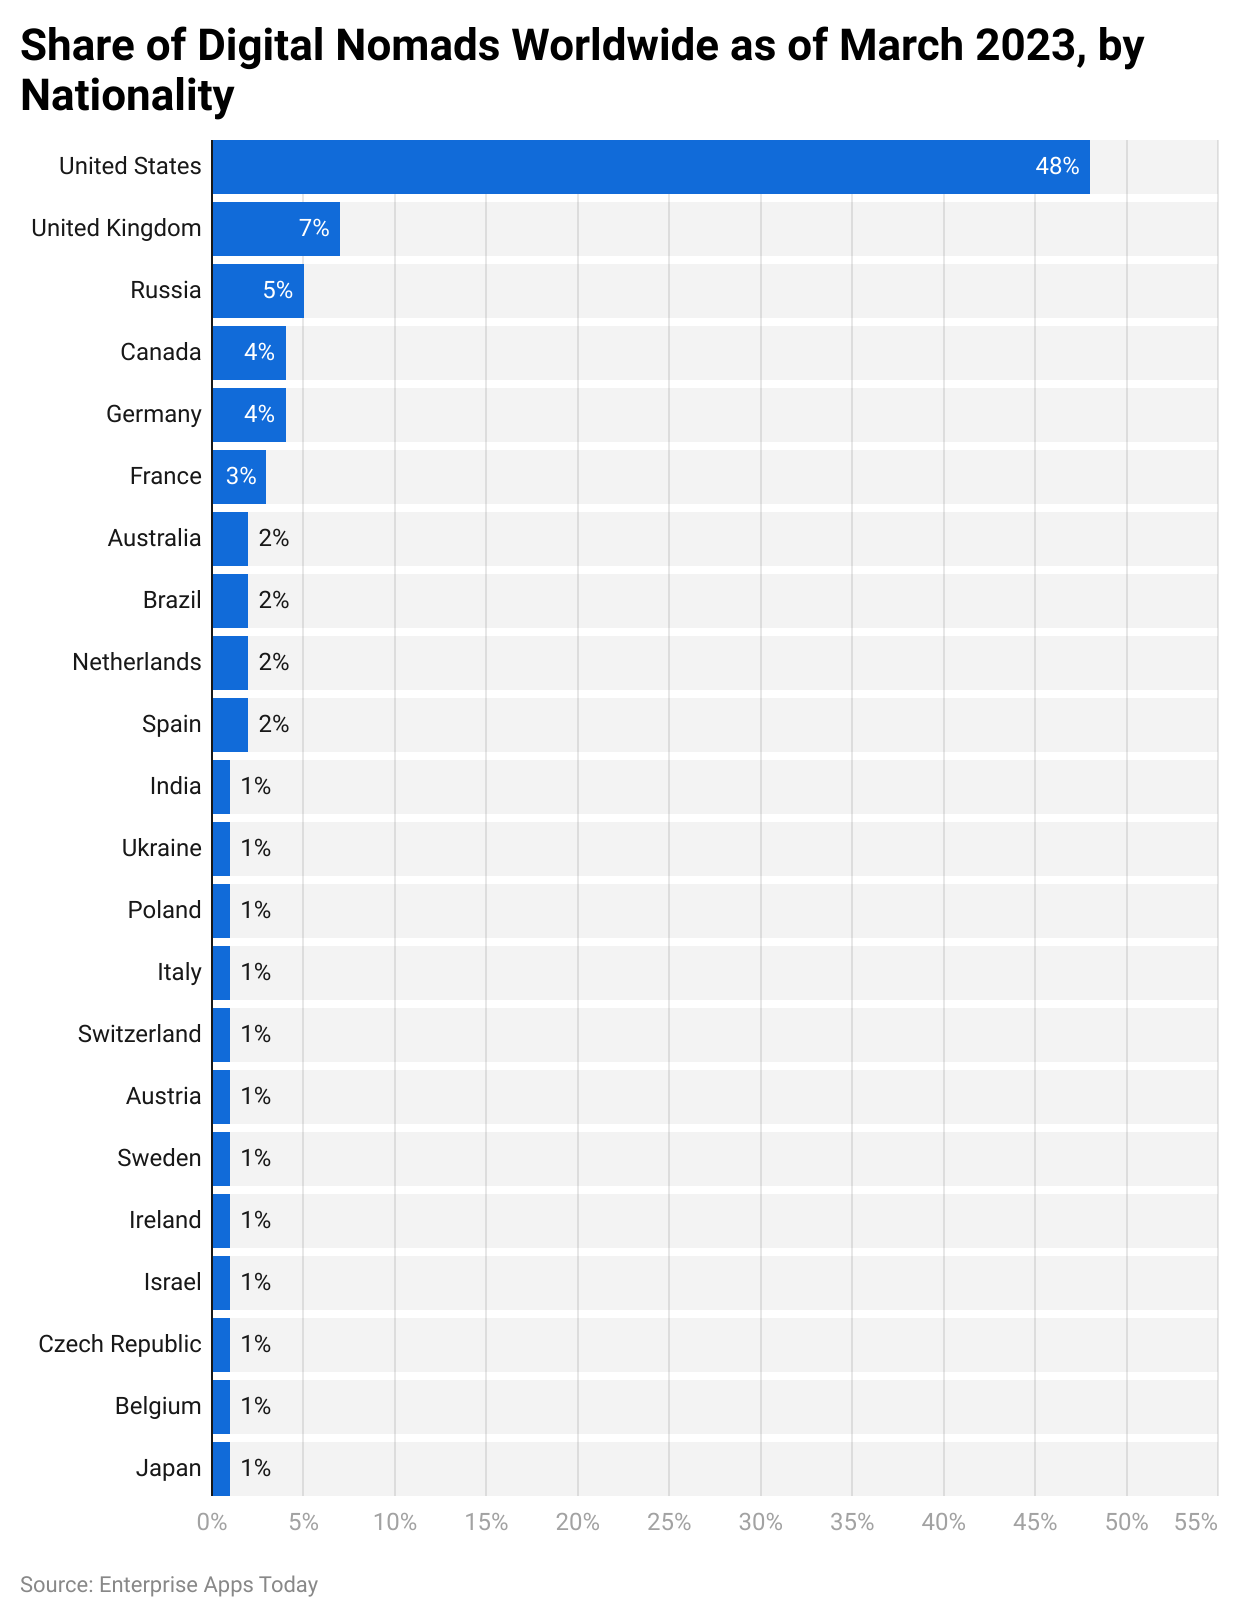 Share of digital nomads worldwide as of March 2023, by nationality